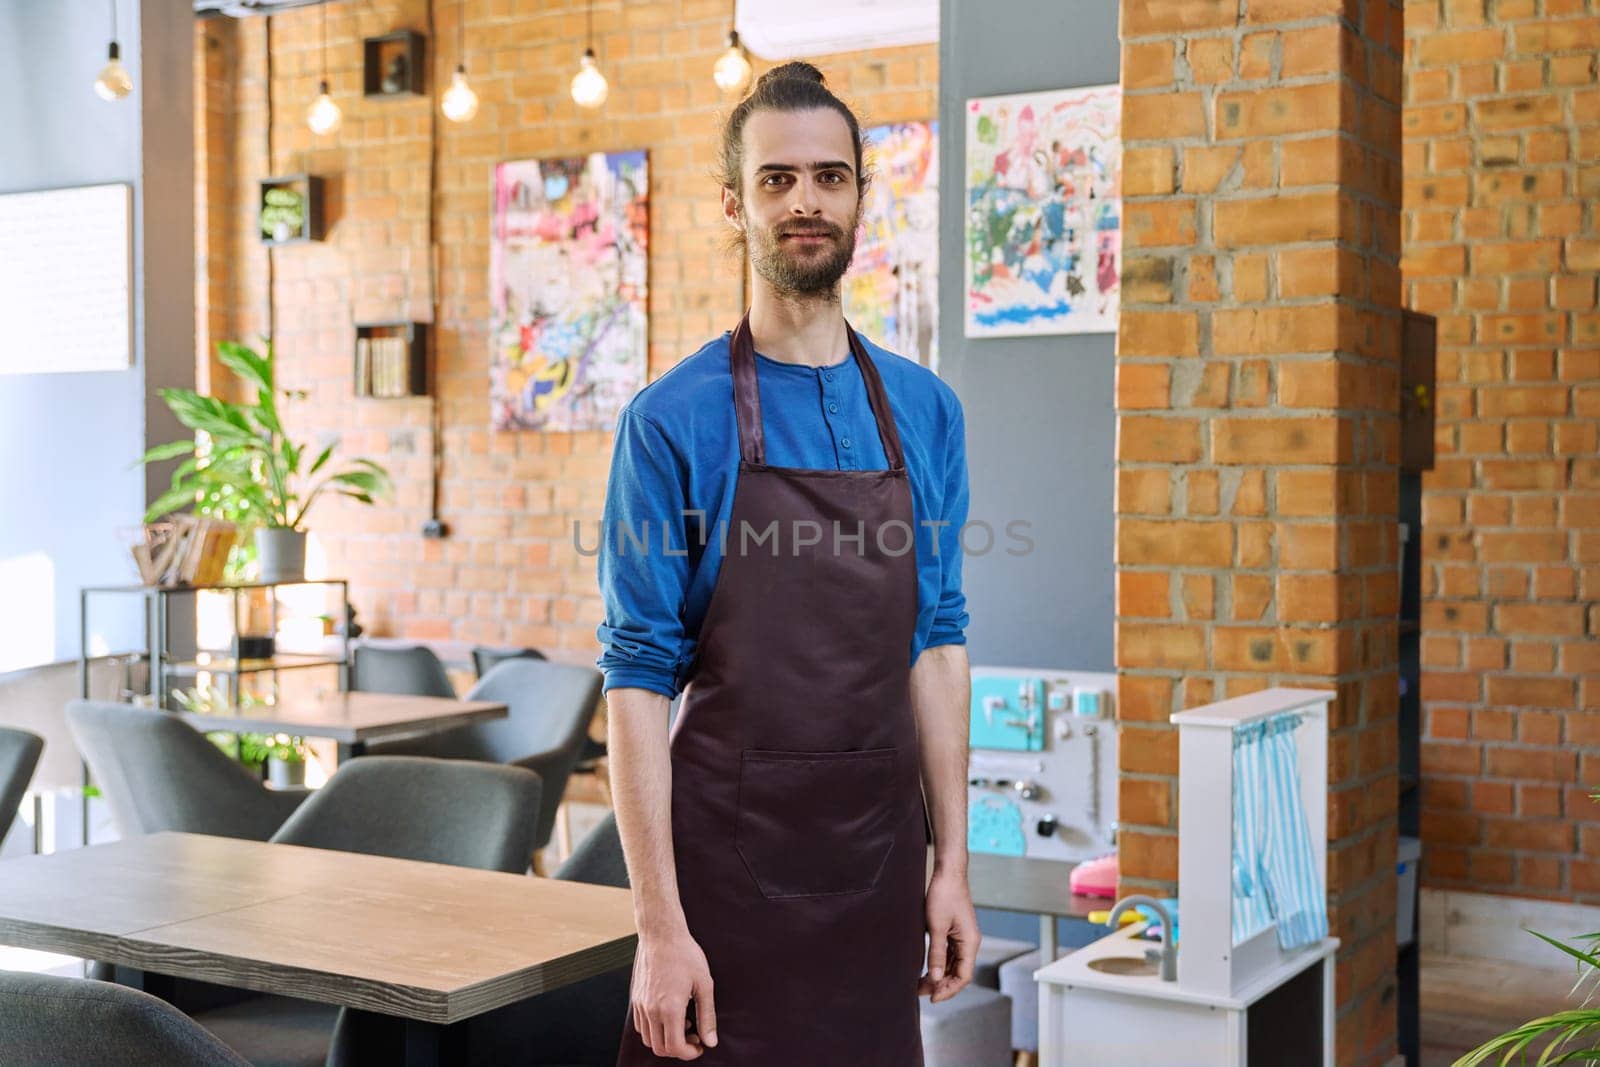 Confident successful young man service worker owner in apron, handsome male looking at camera in restaurant cafeteria coffee pastry shop interior. Small business staff occupation entrepreneur work